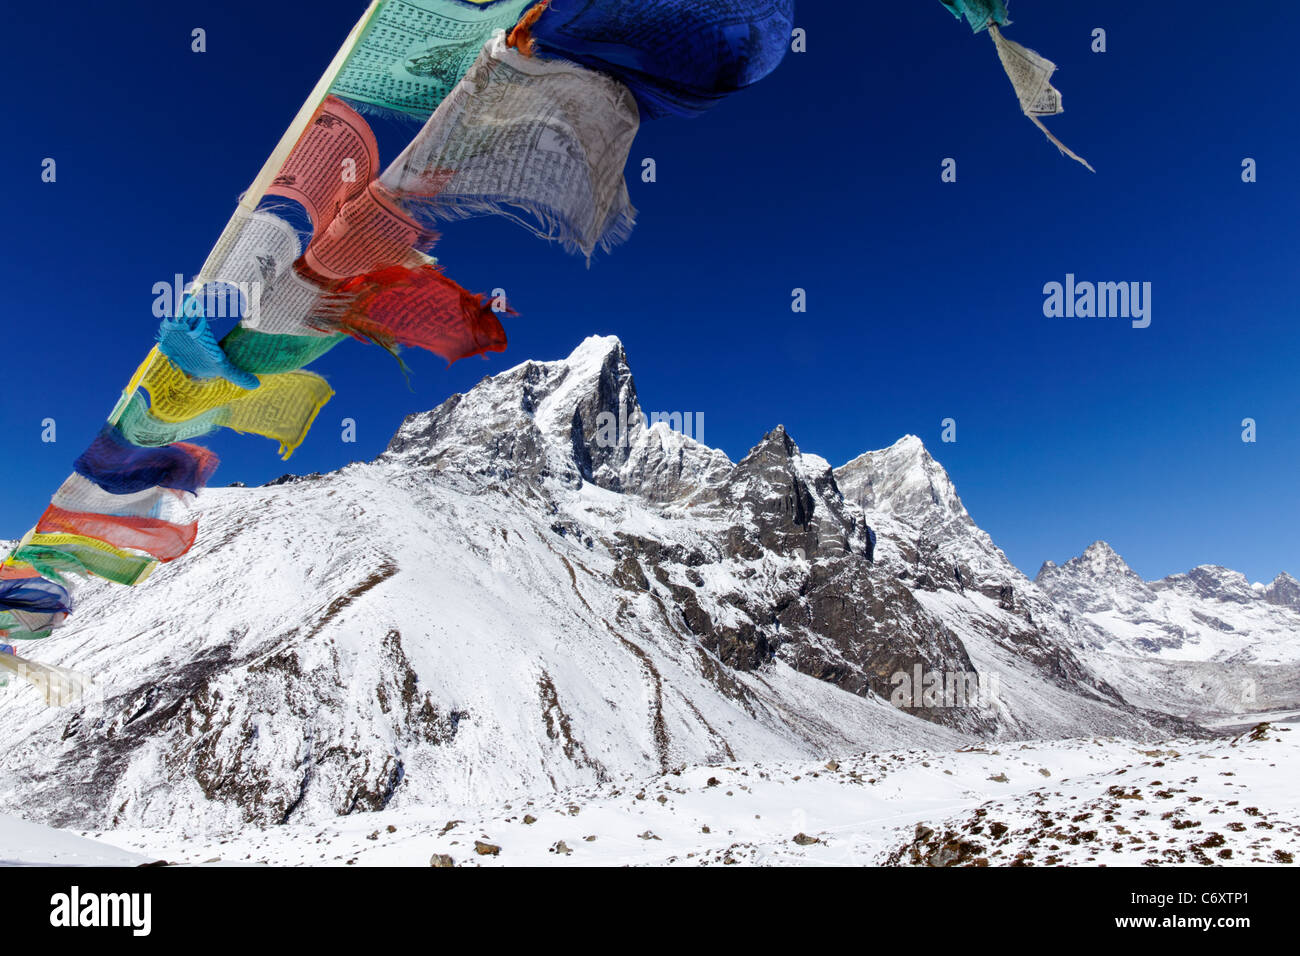 Prayer flags and snowy mountains, Everest Region, Nepal Stock Photo